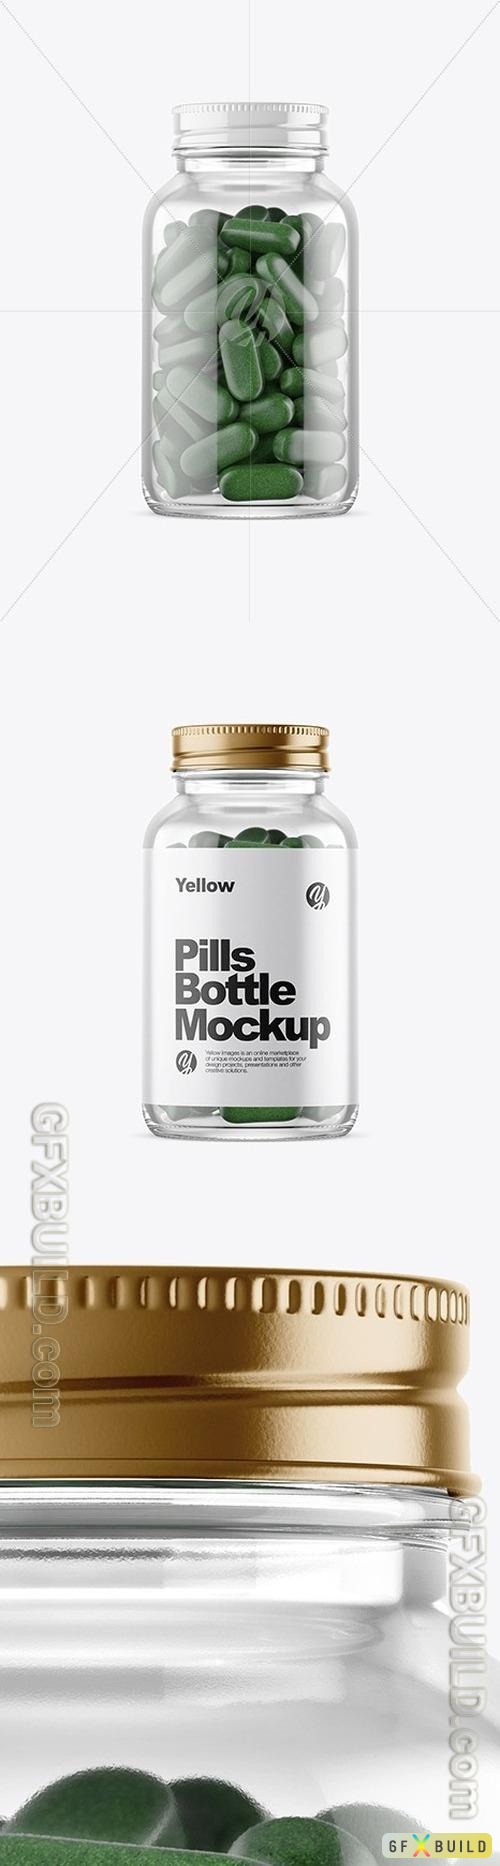 Clear Glass Bottle With Pills Mockup 51638